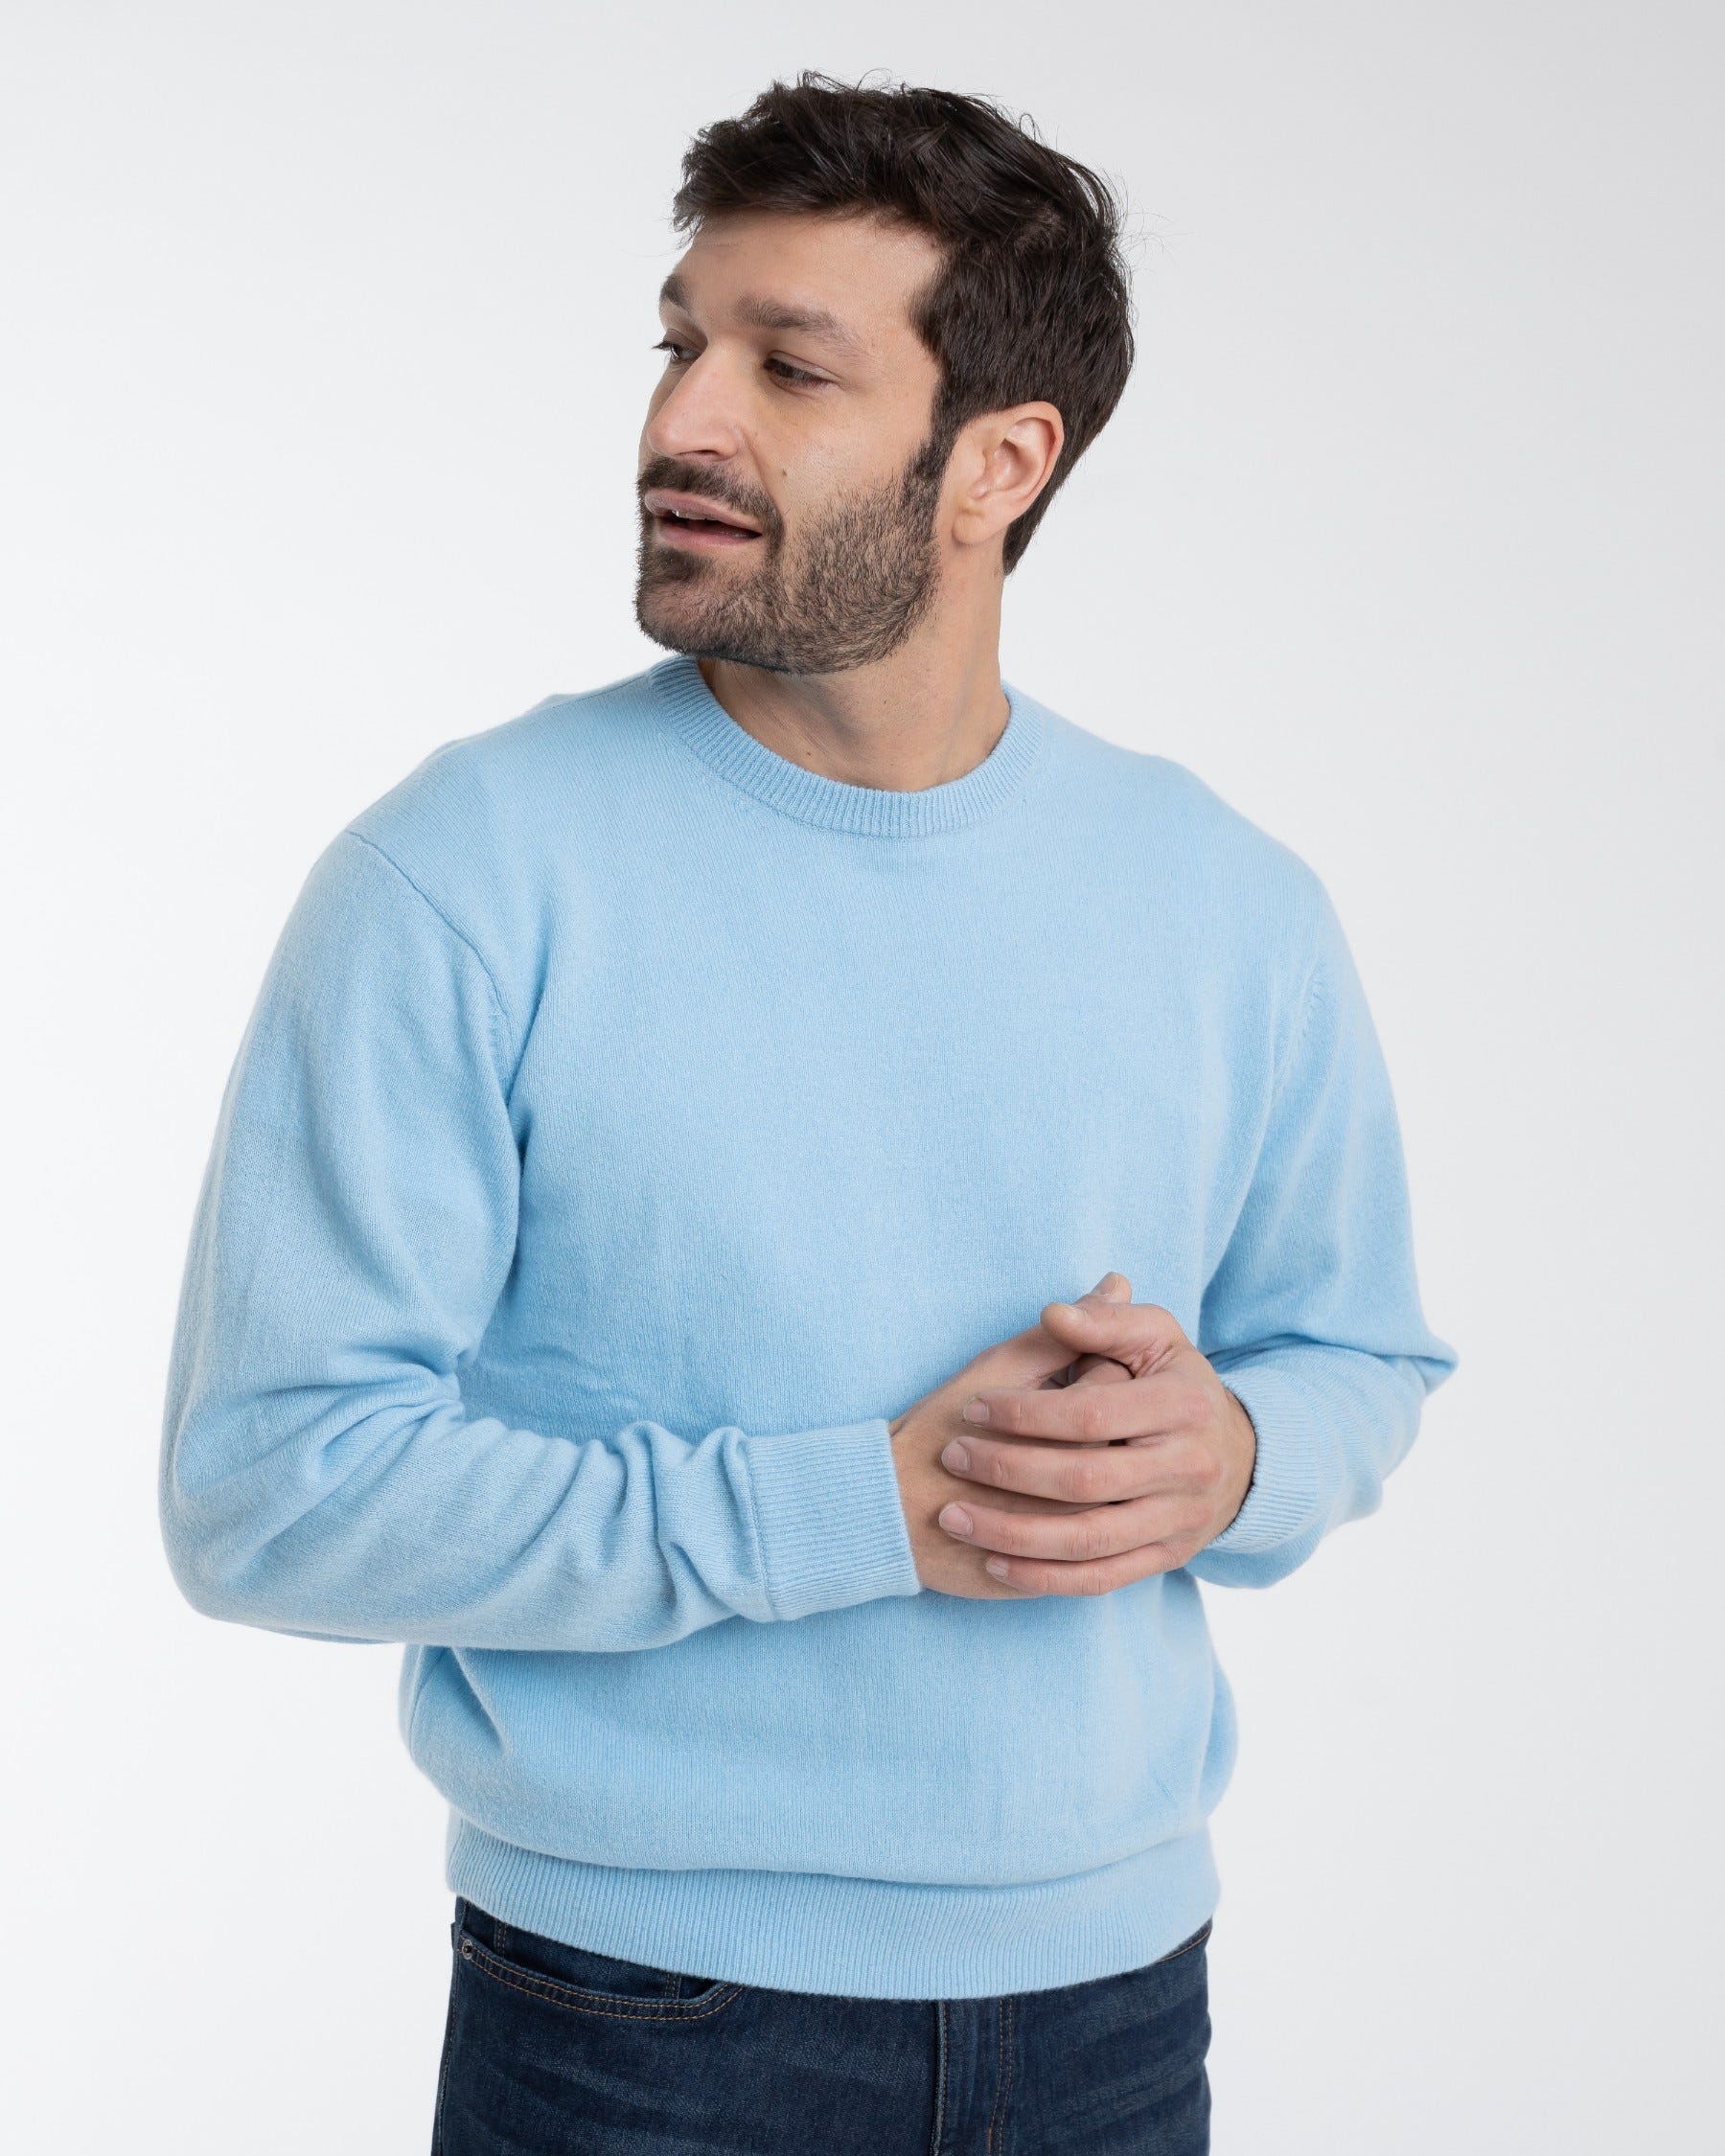 Classic Crew Neck 100% Cashmere Sweater (Choice of Colors) by Alashan Cashmere